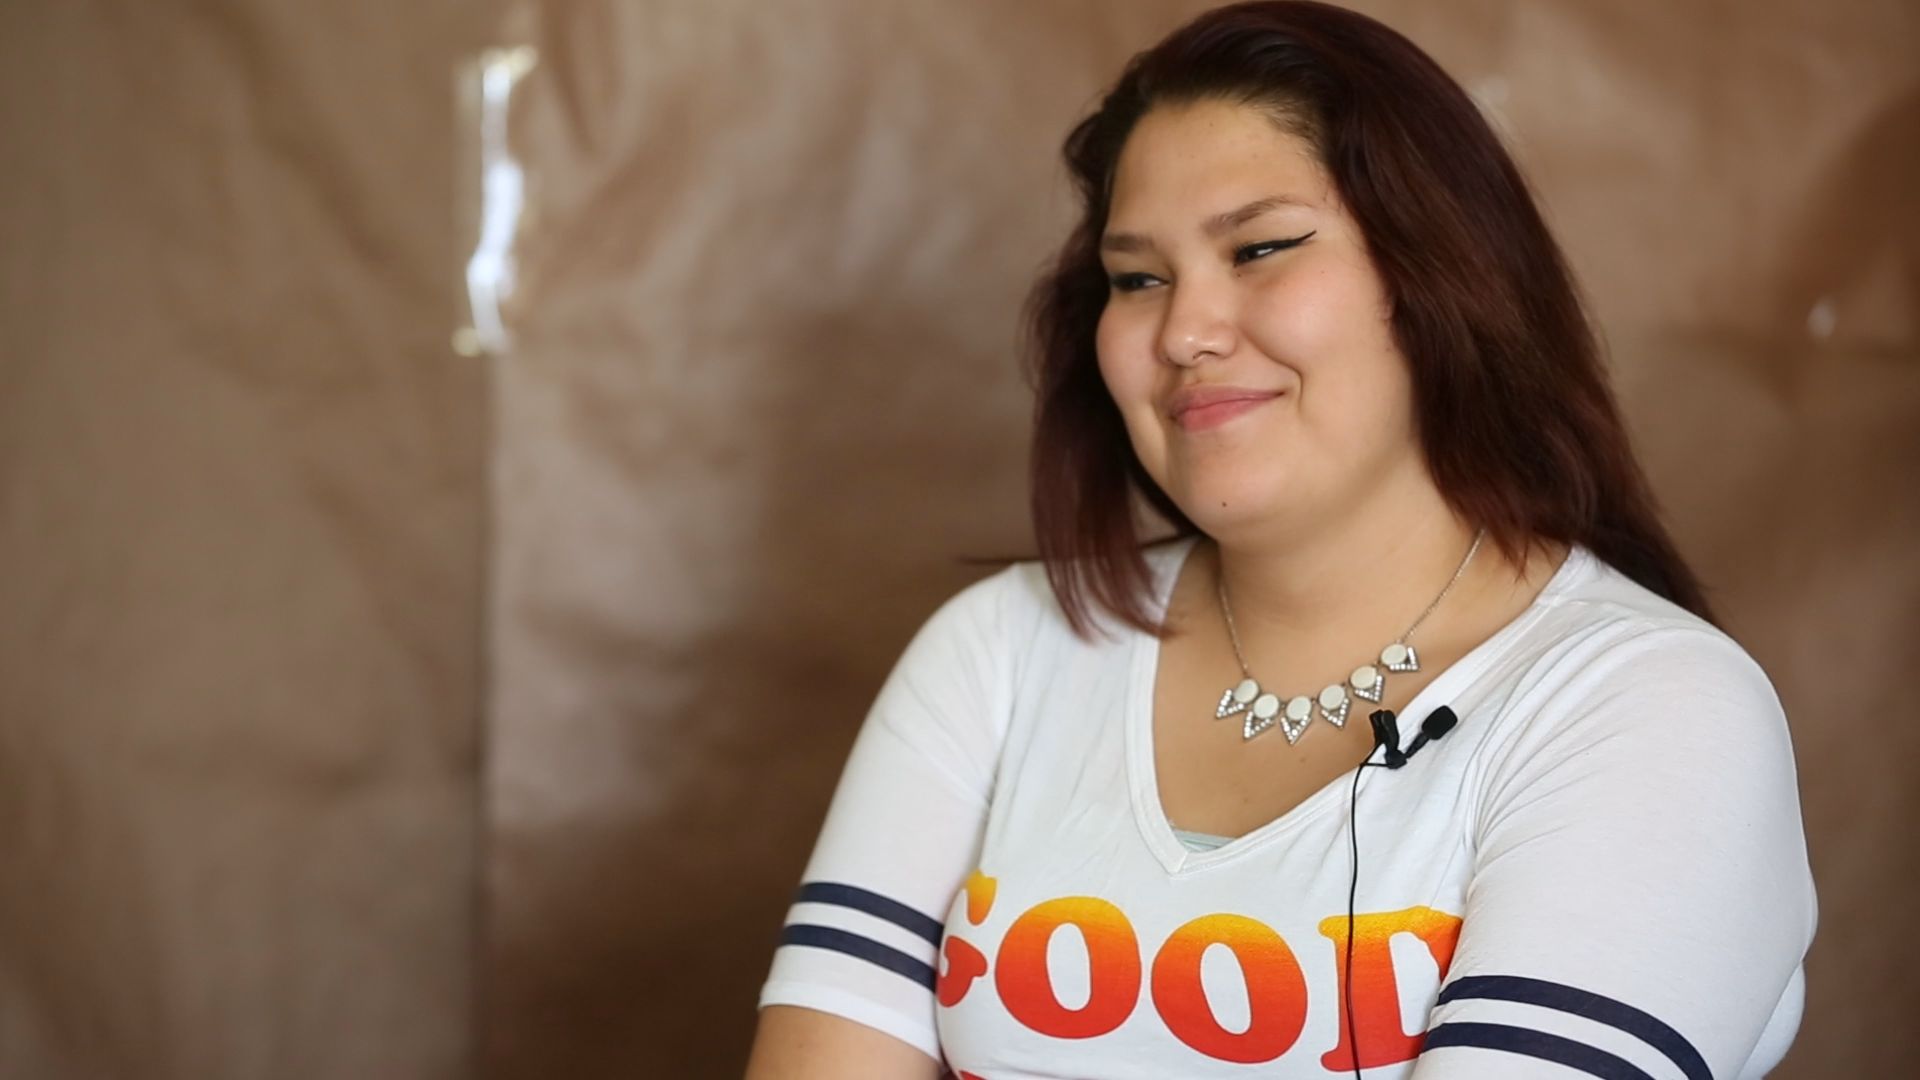 Why Many Native American Girls Skip School When They Have Their Period